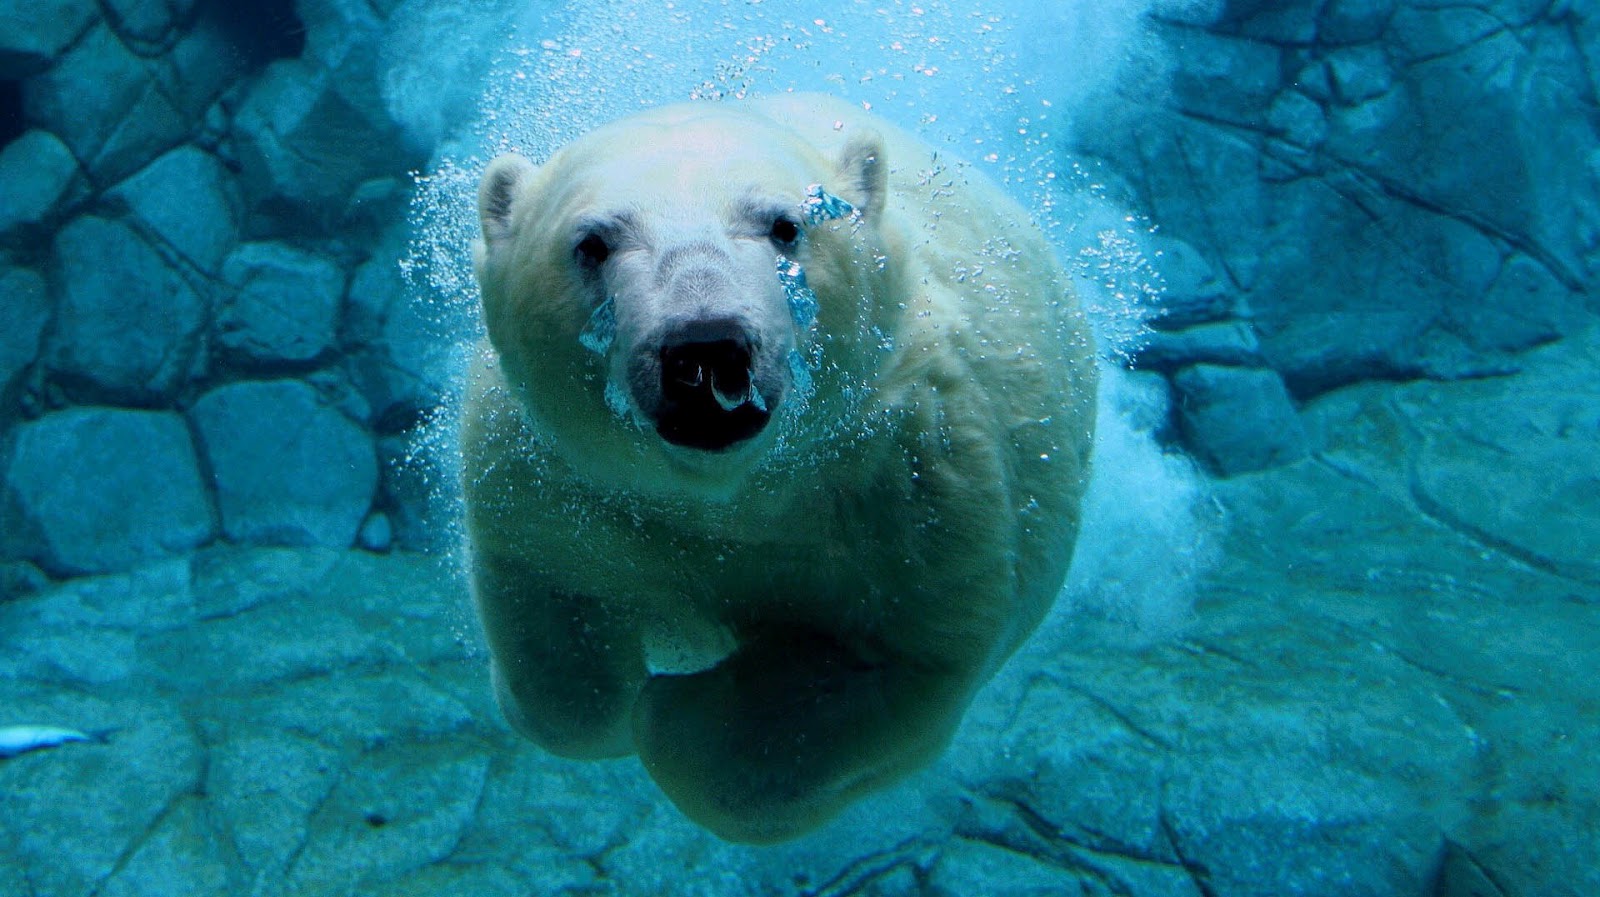 HD Animal Wallpaper With A Polar Bear Swimming Underwater